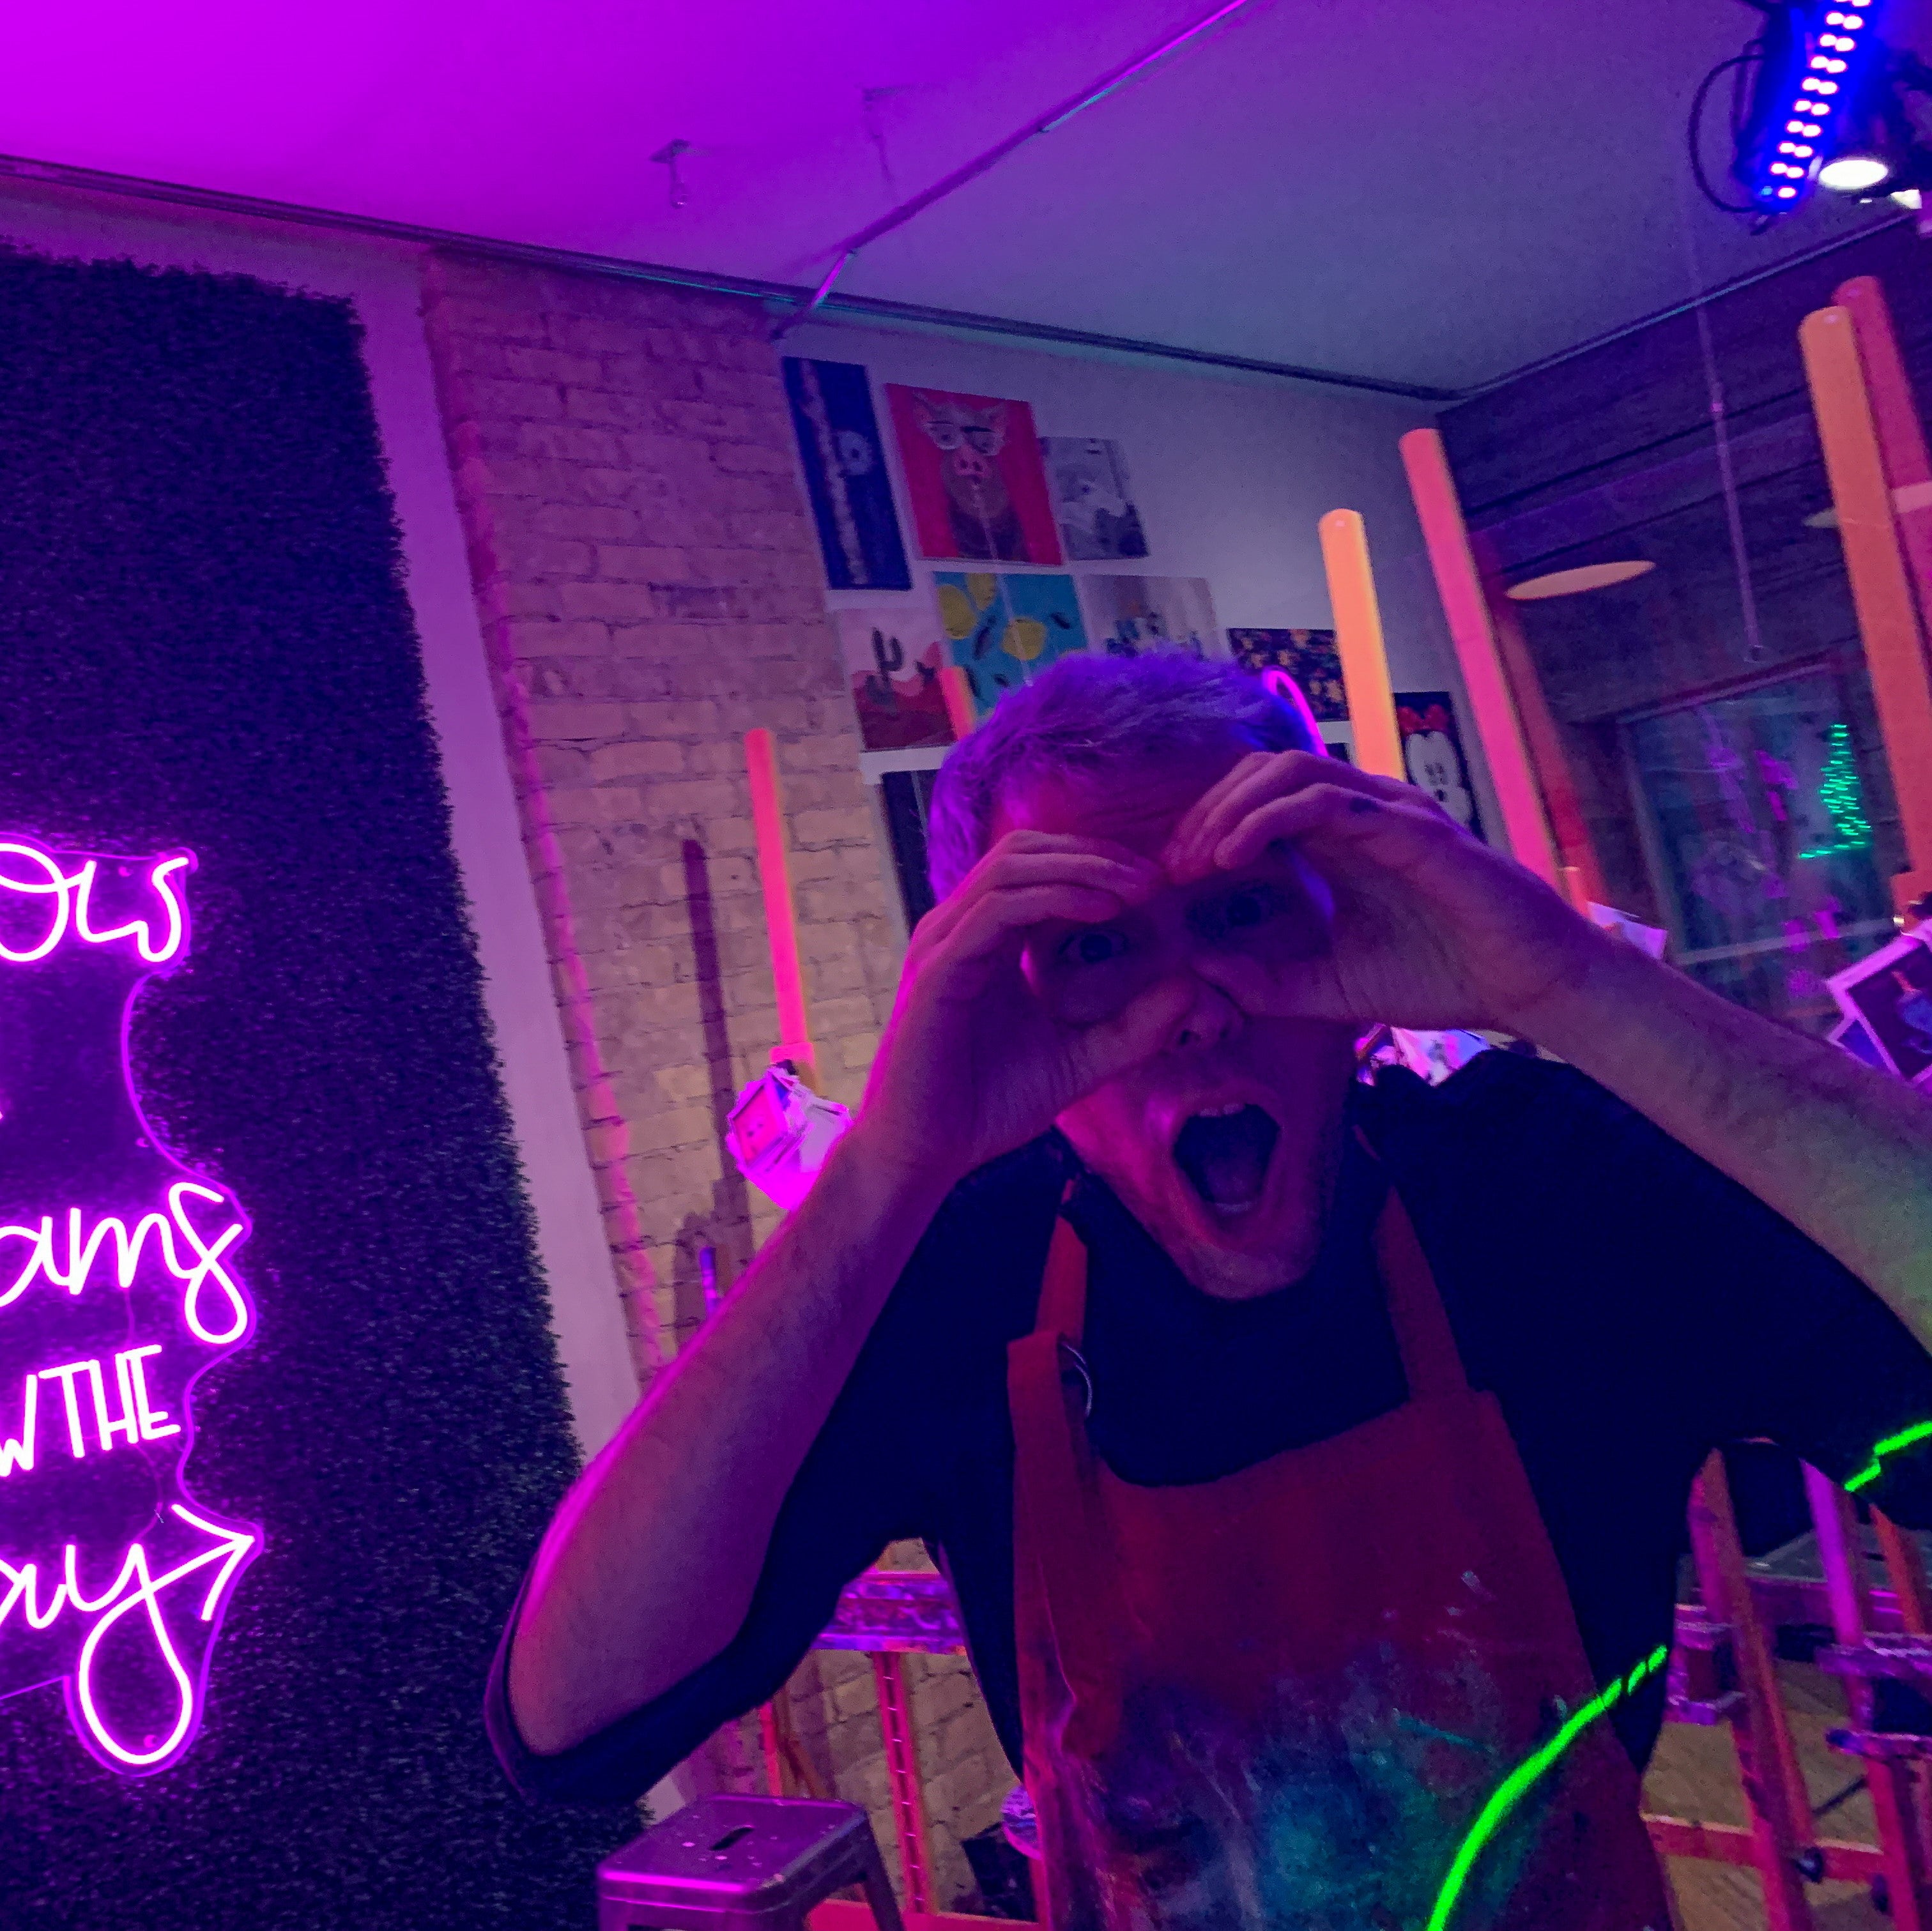 Private Kids Glow in the Dark Painting Party, Virgin Experience Gifts